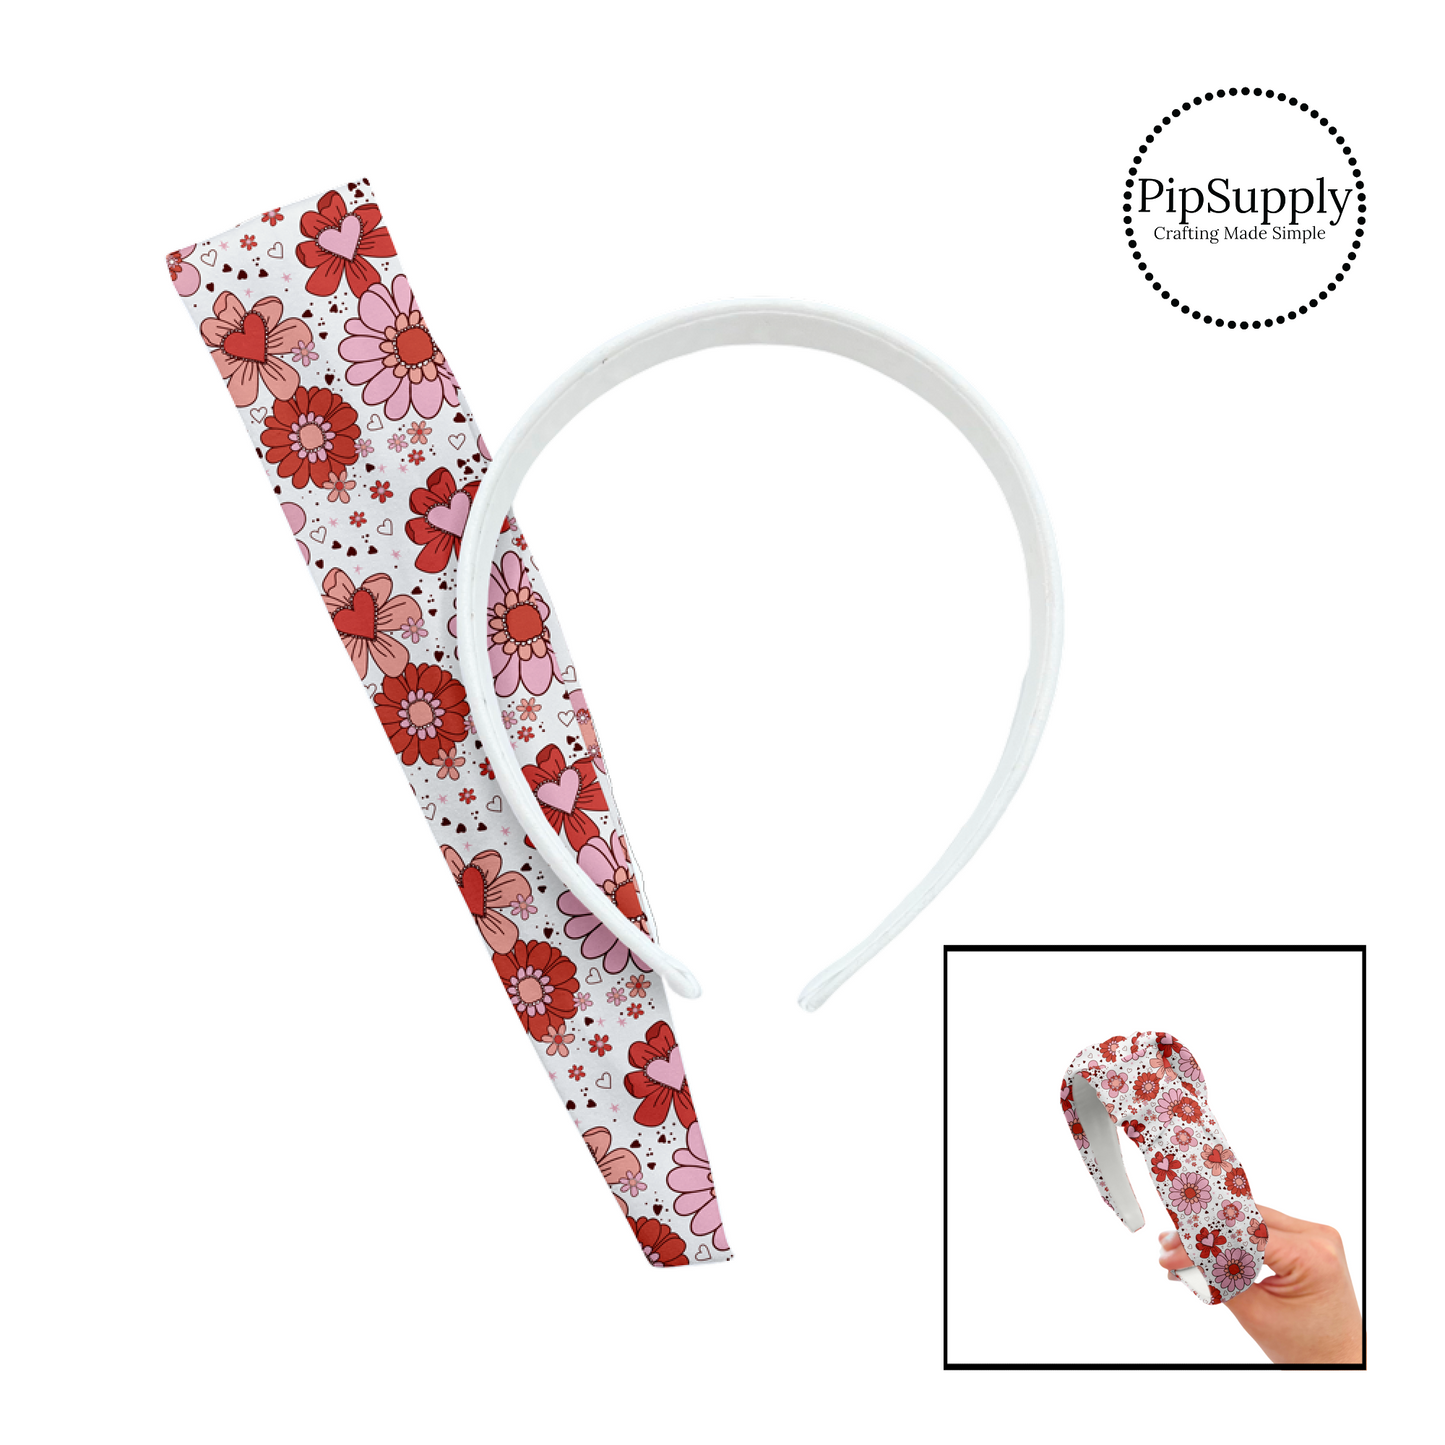 Pink and red flowers with hearts on white knotted headband kit